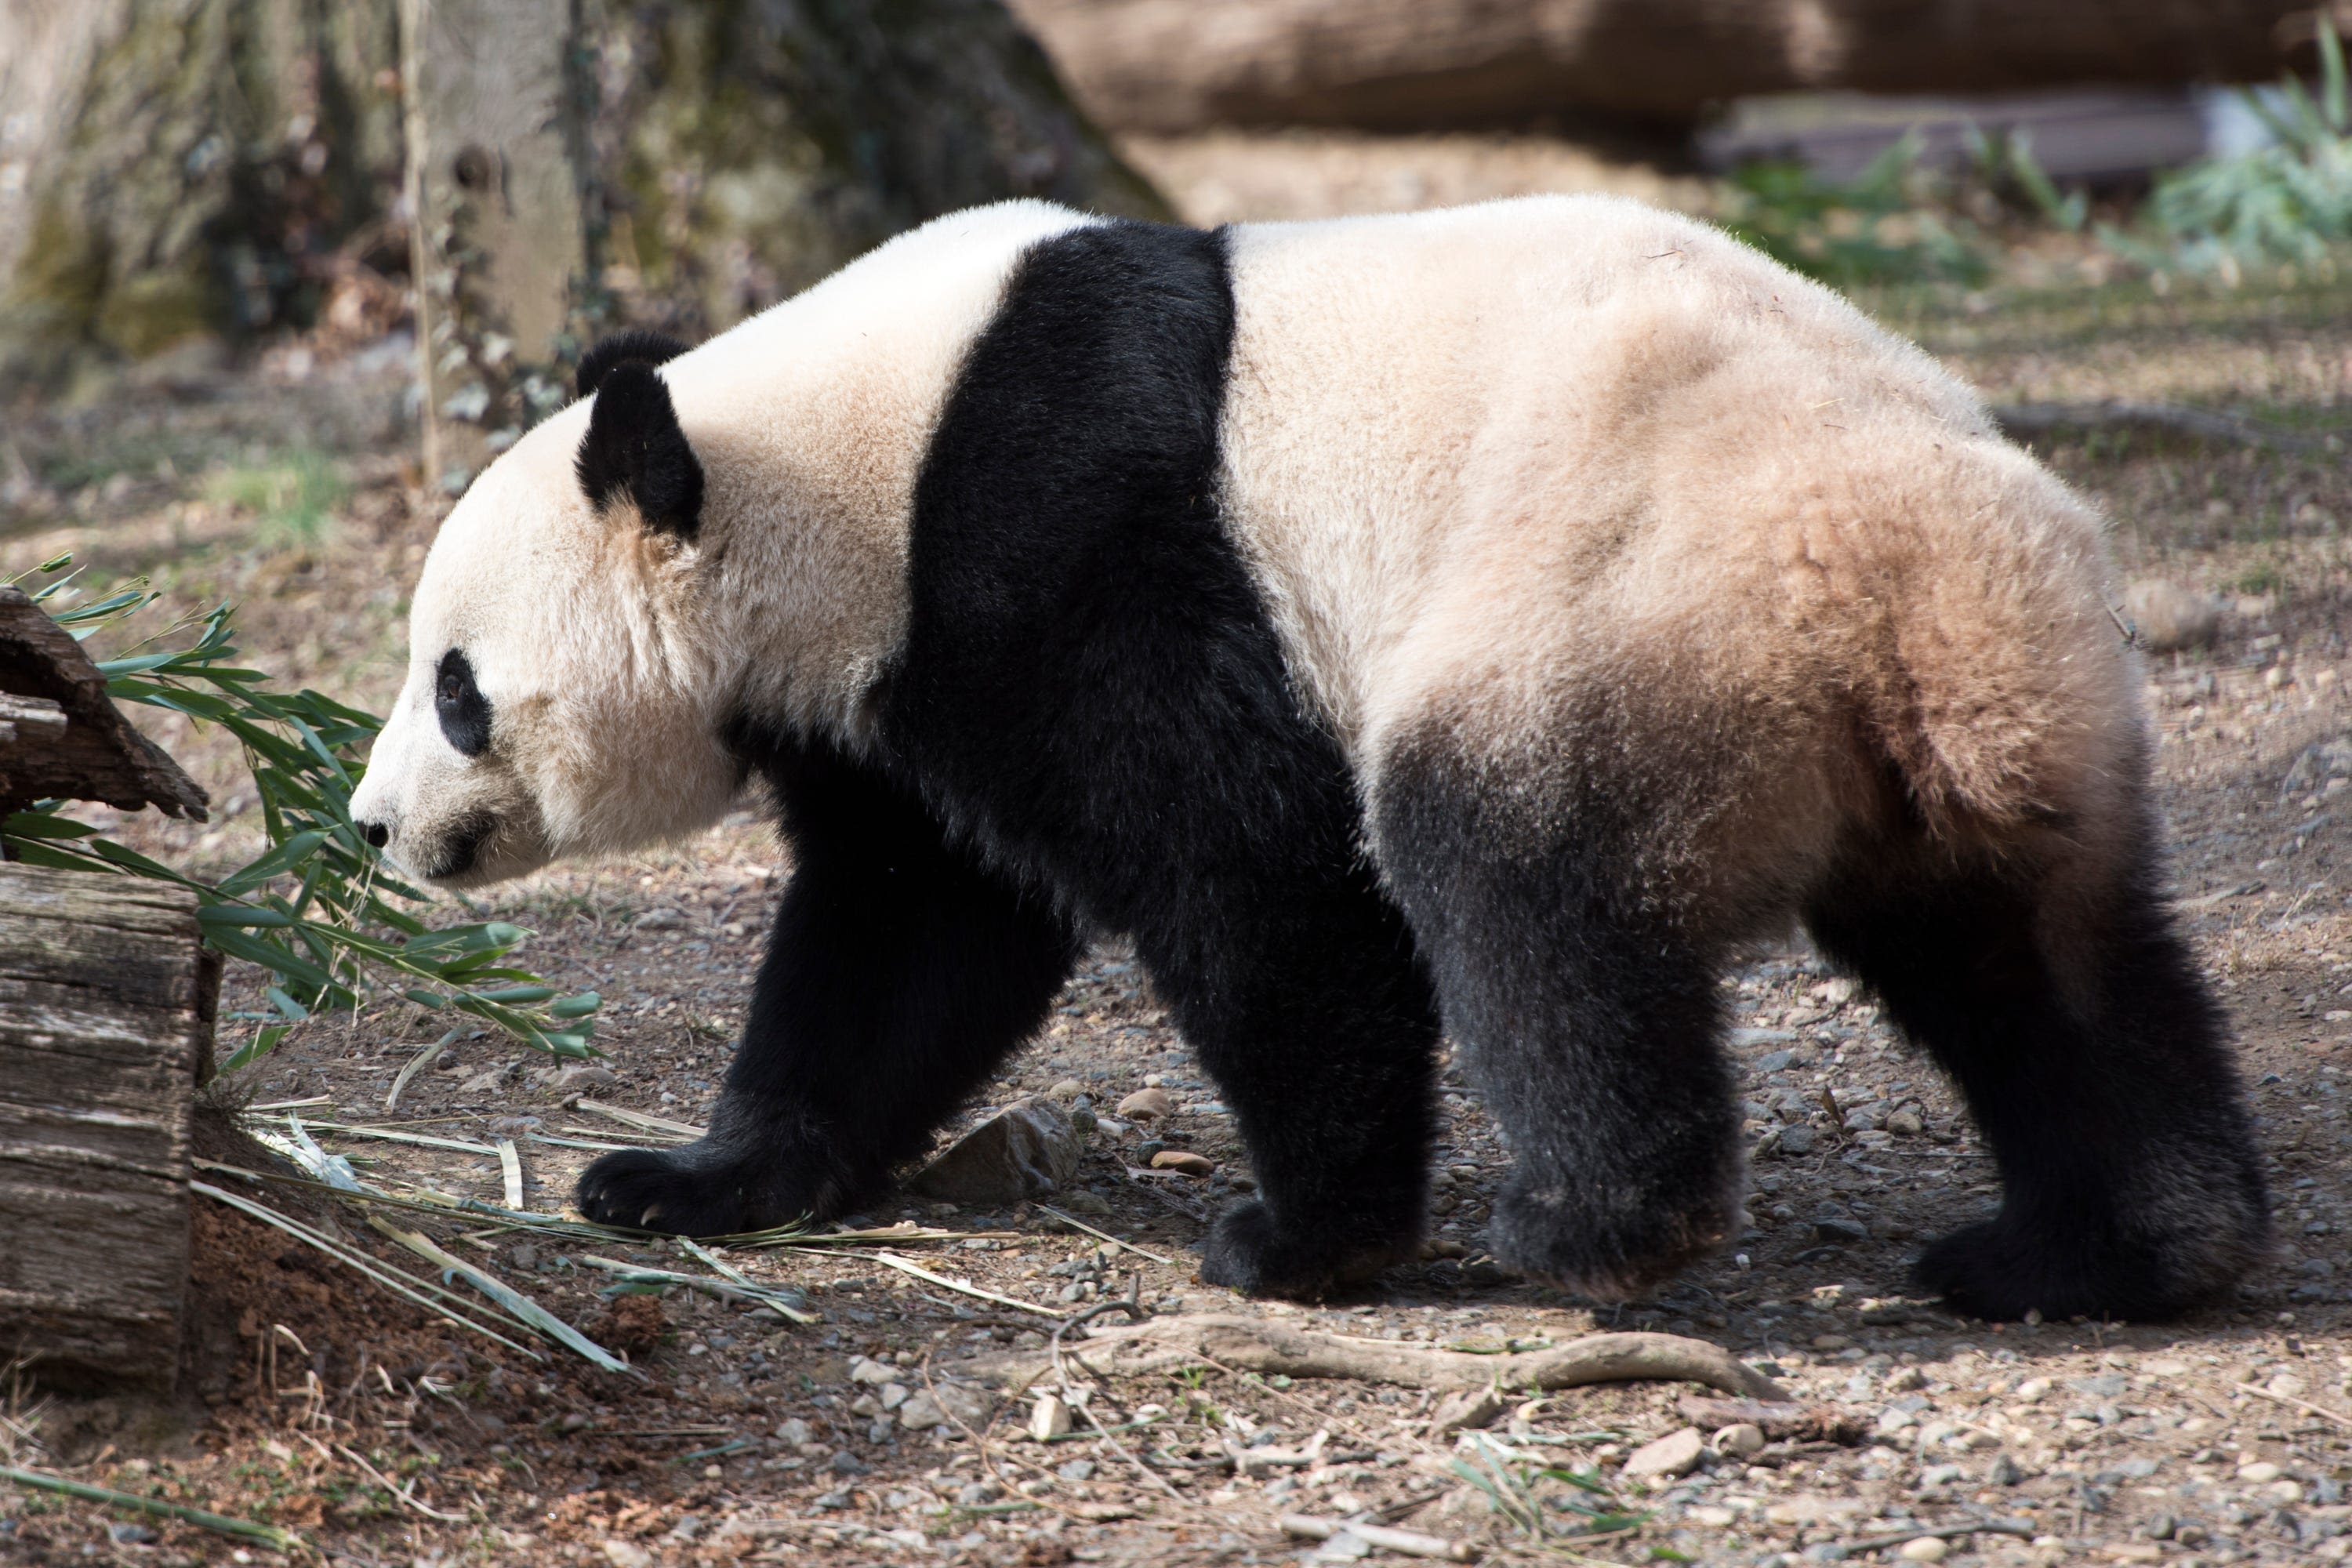 More pandas are coming to the US. This time to San Francisco, the first time since 1985